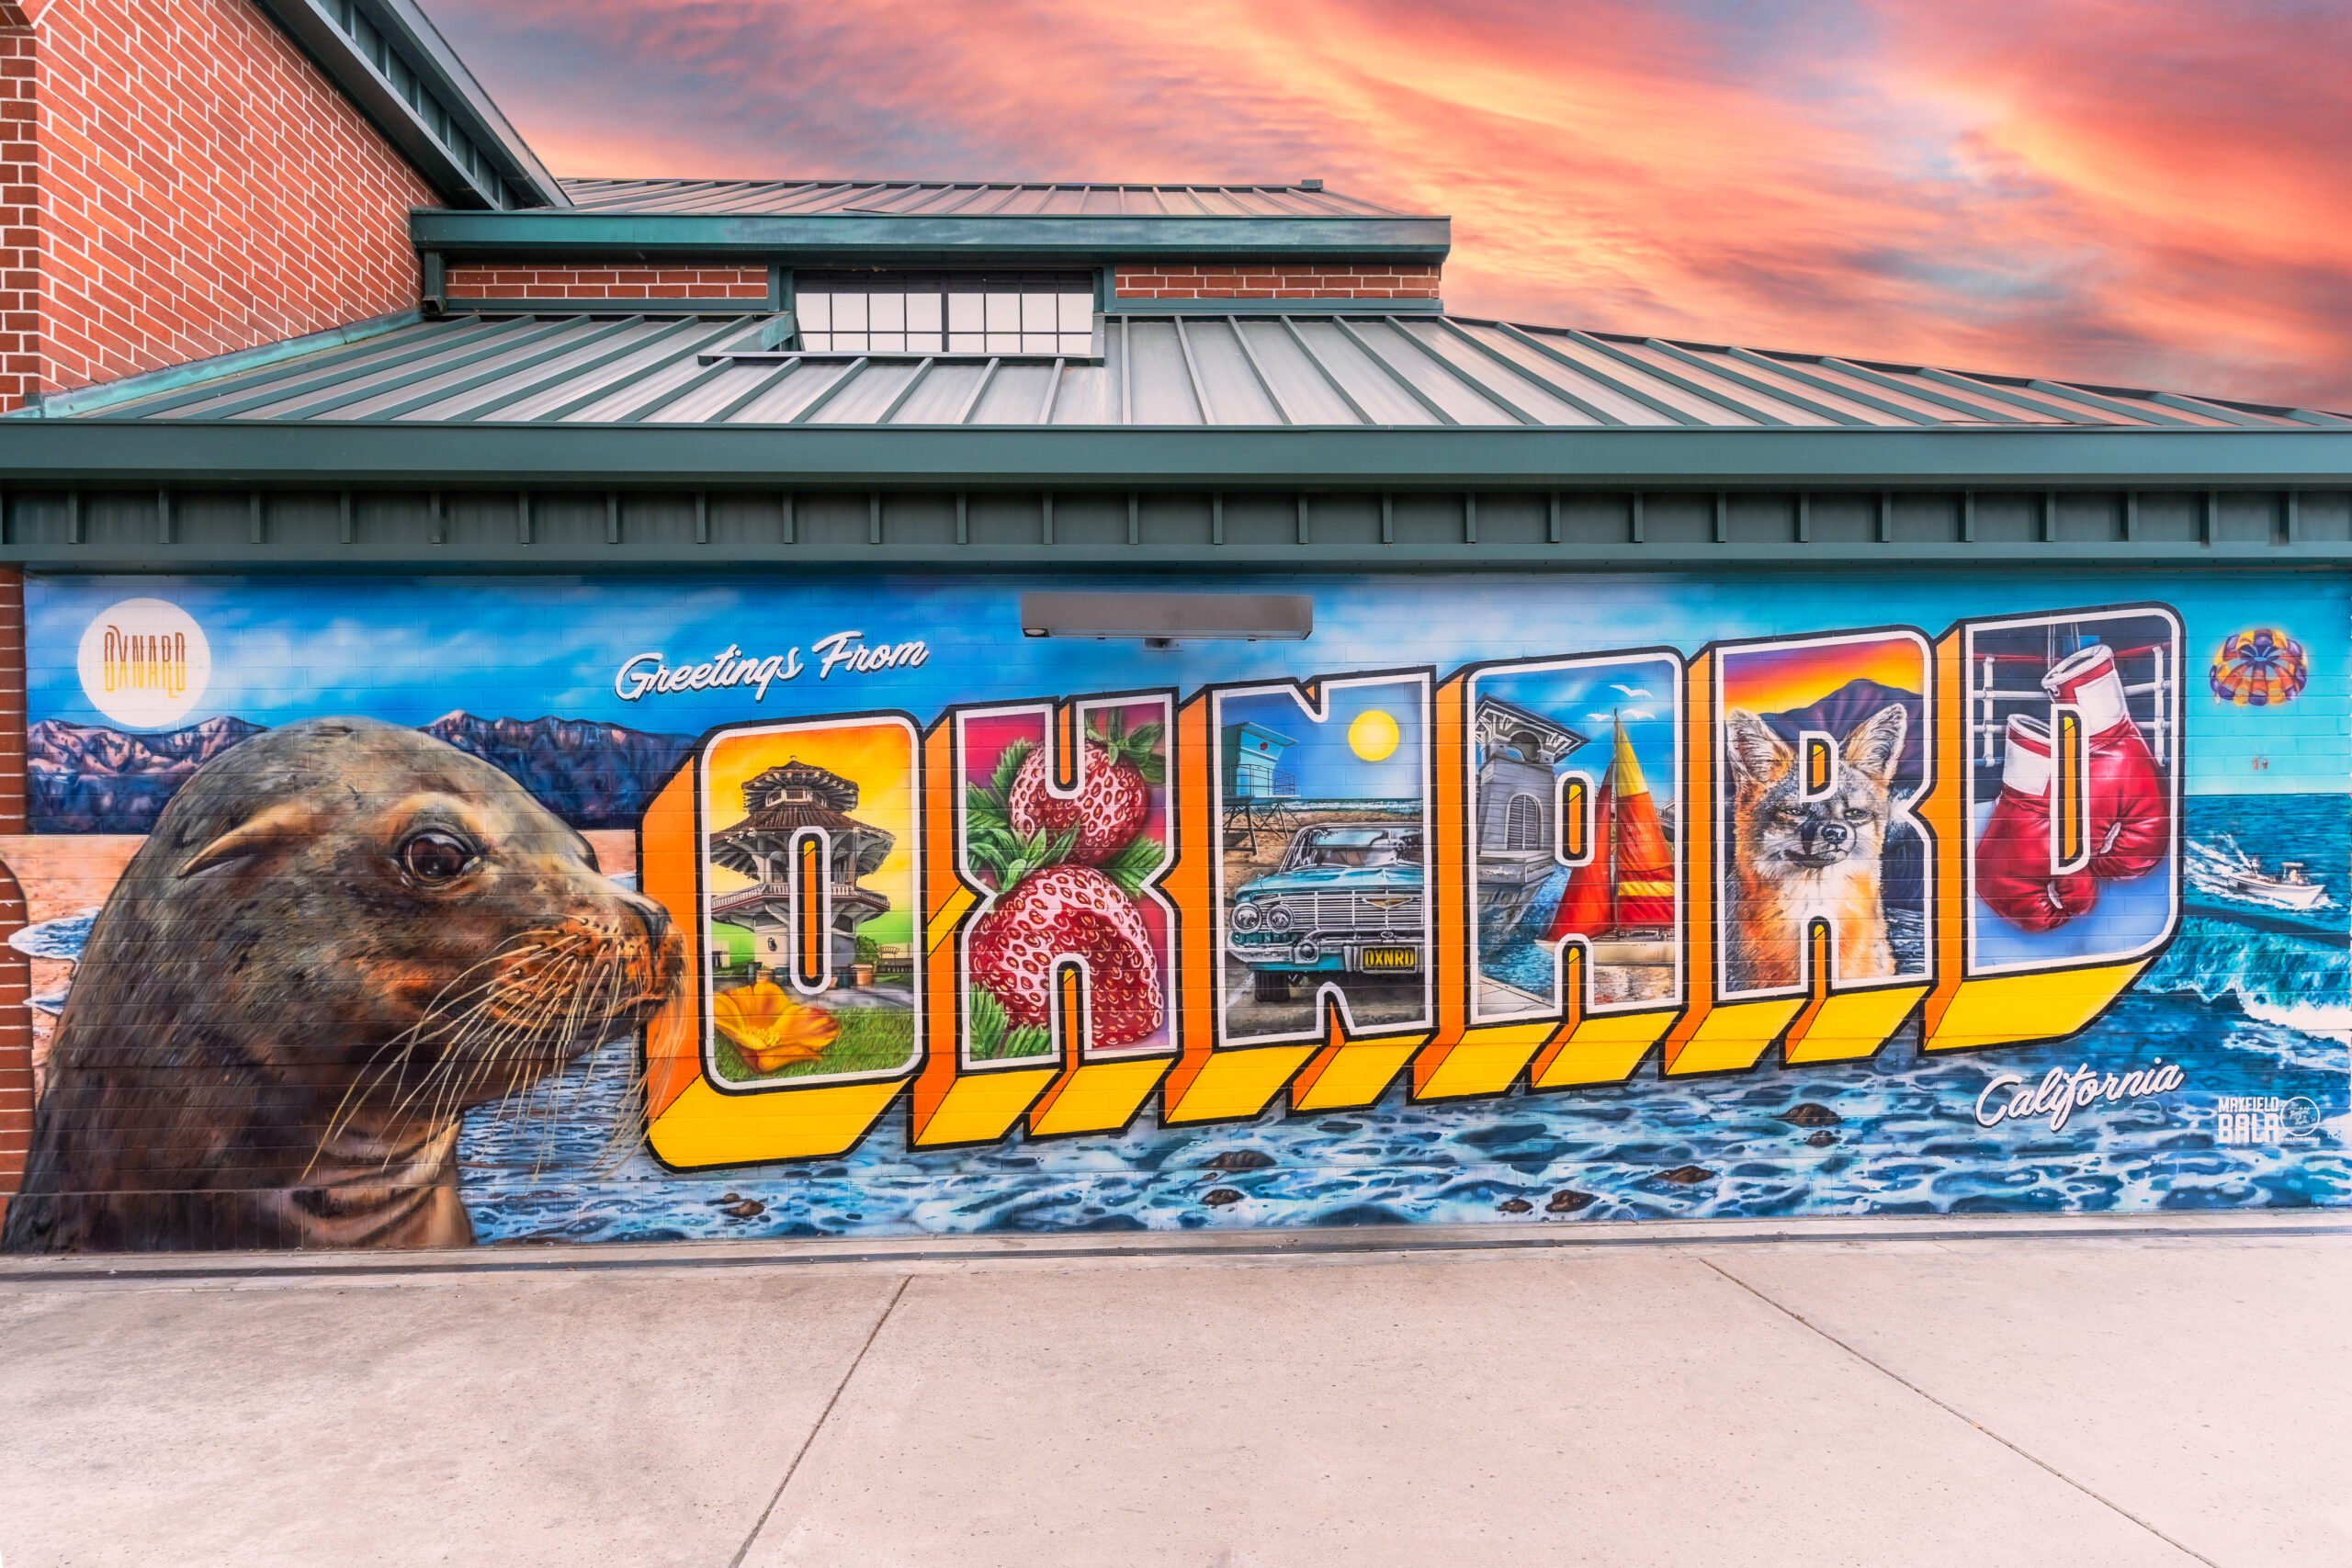 A wall with a graphic on it depicting different aspects of the city and words that say "Greetings from Oxnard California".